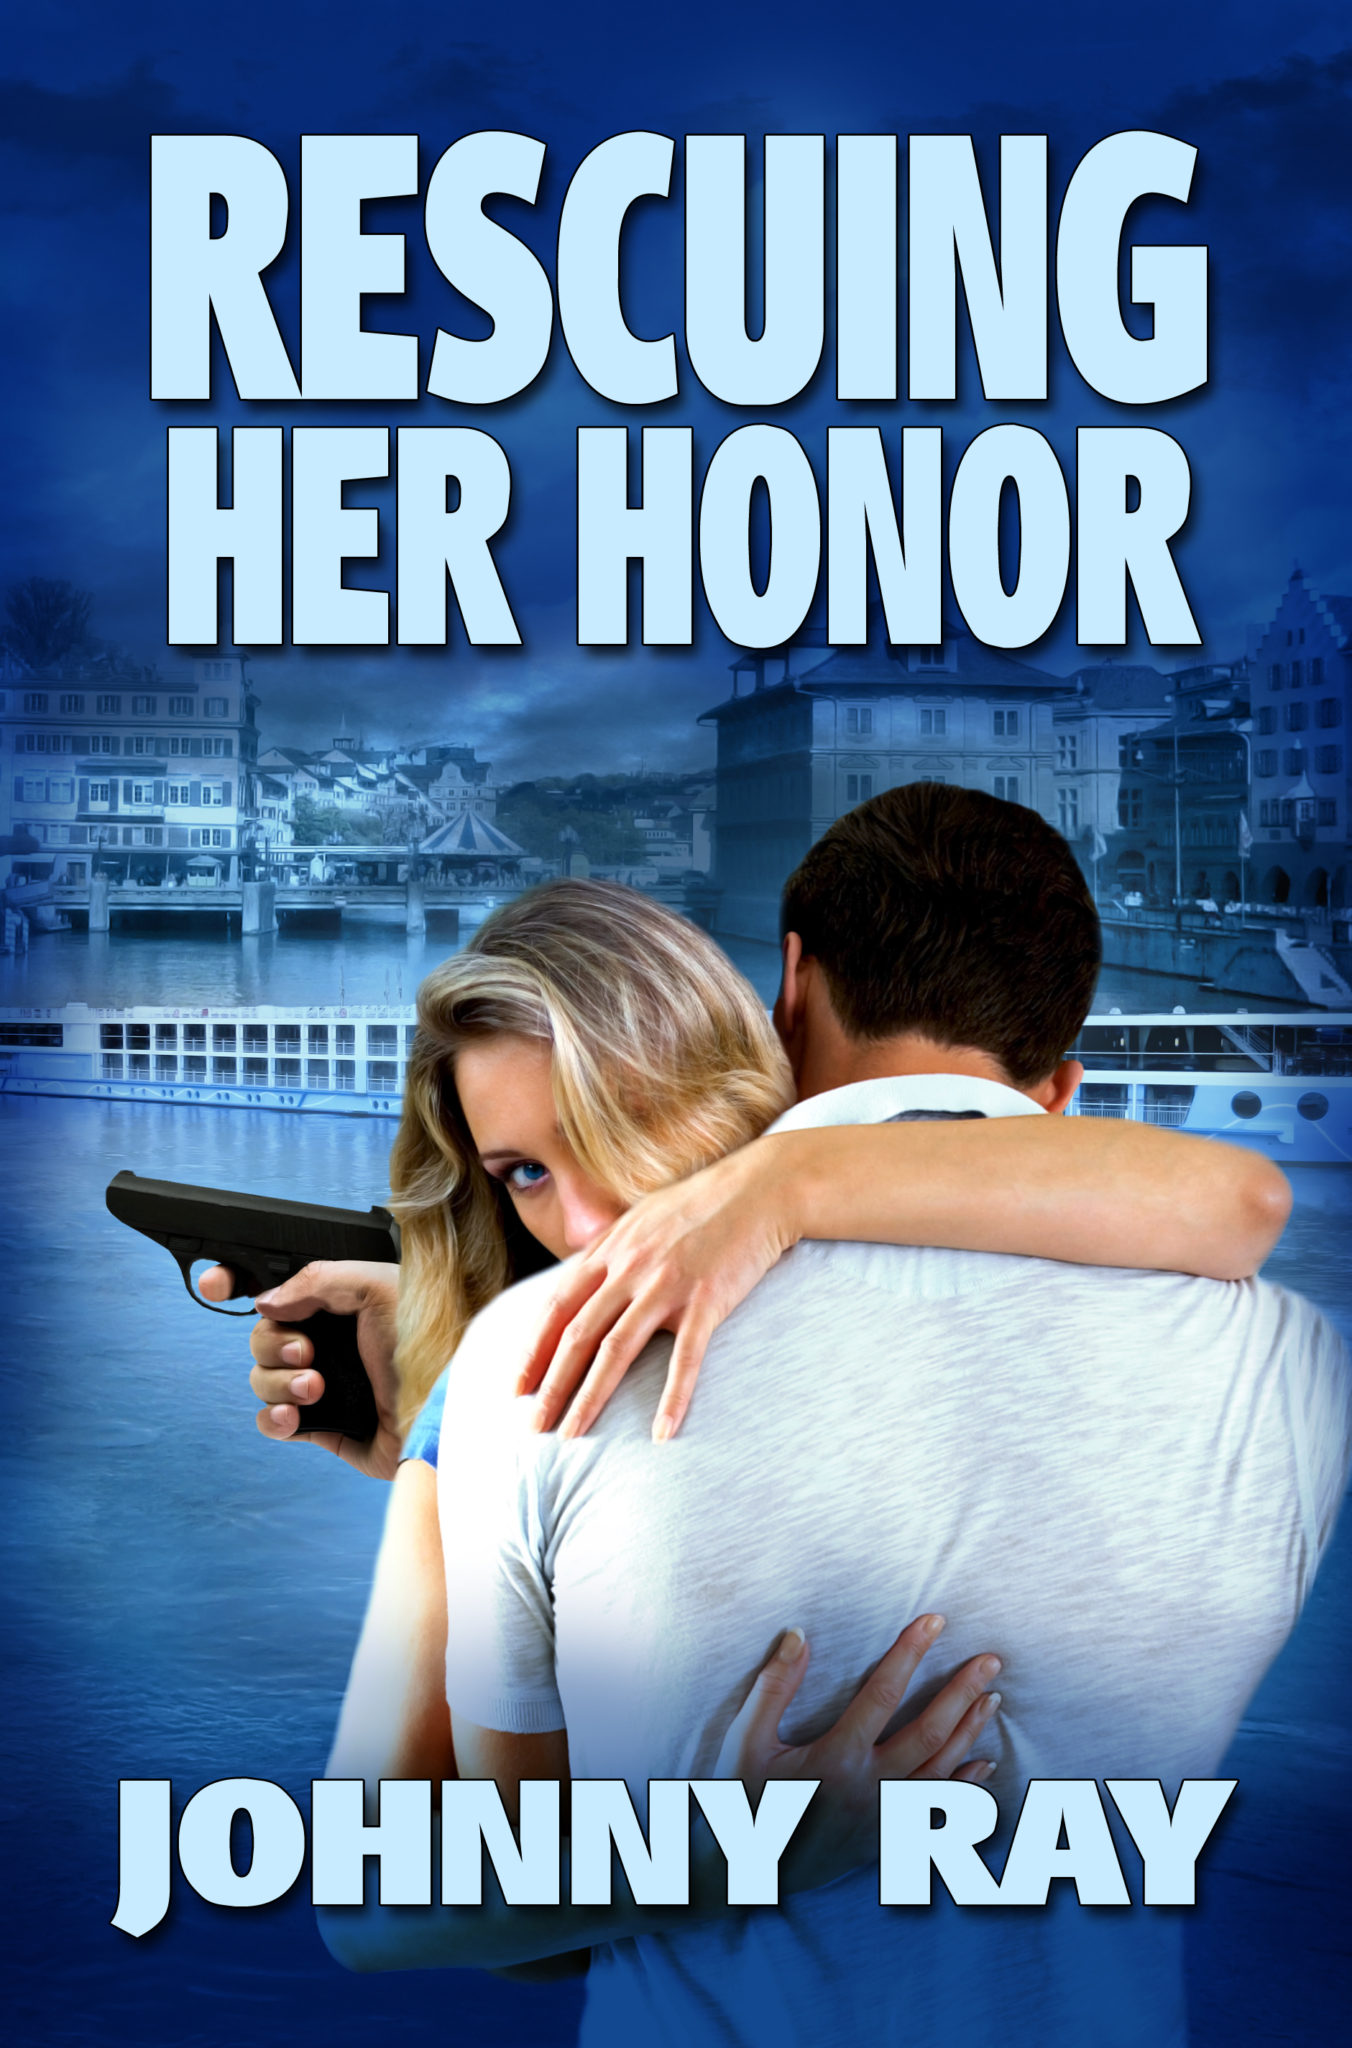 RESCUING HER HONOR by JOHNNY RAY